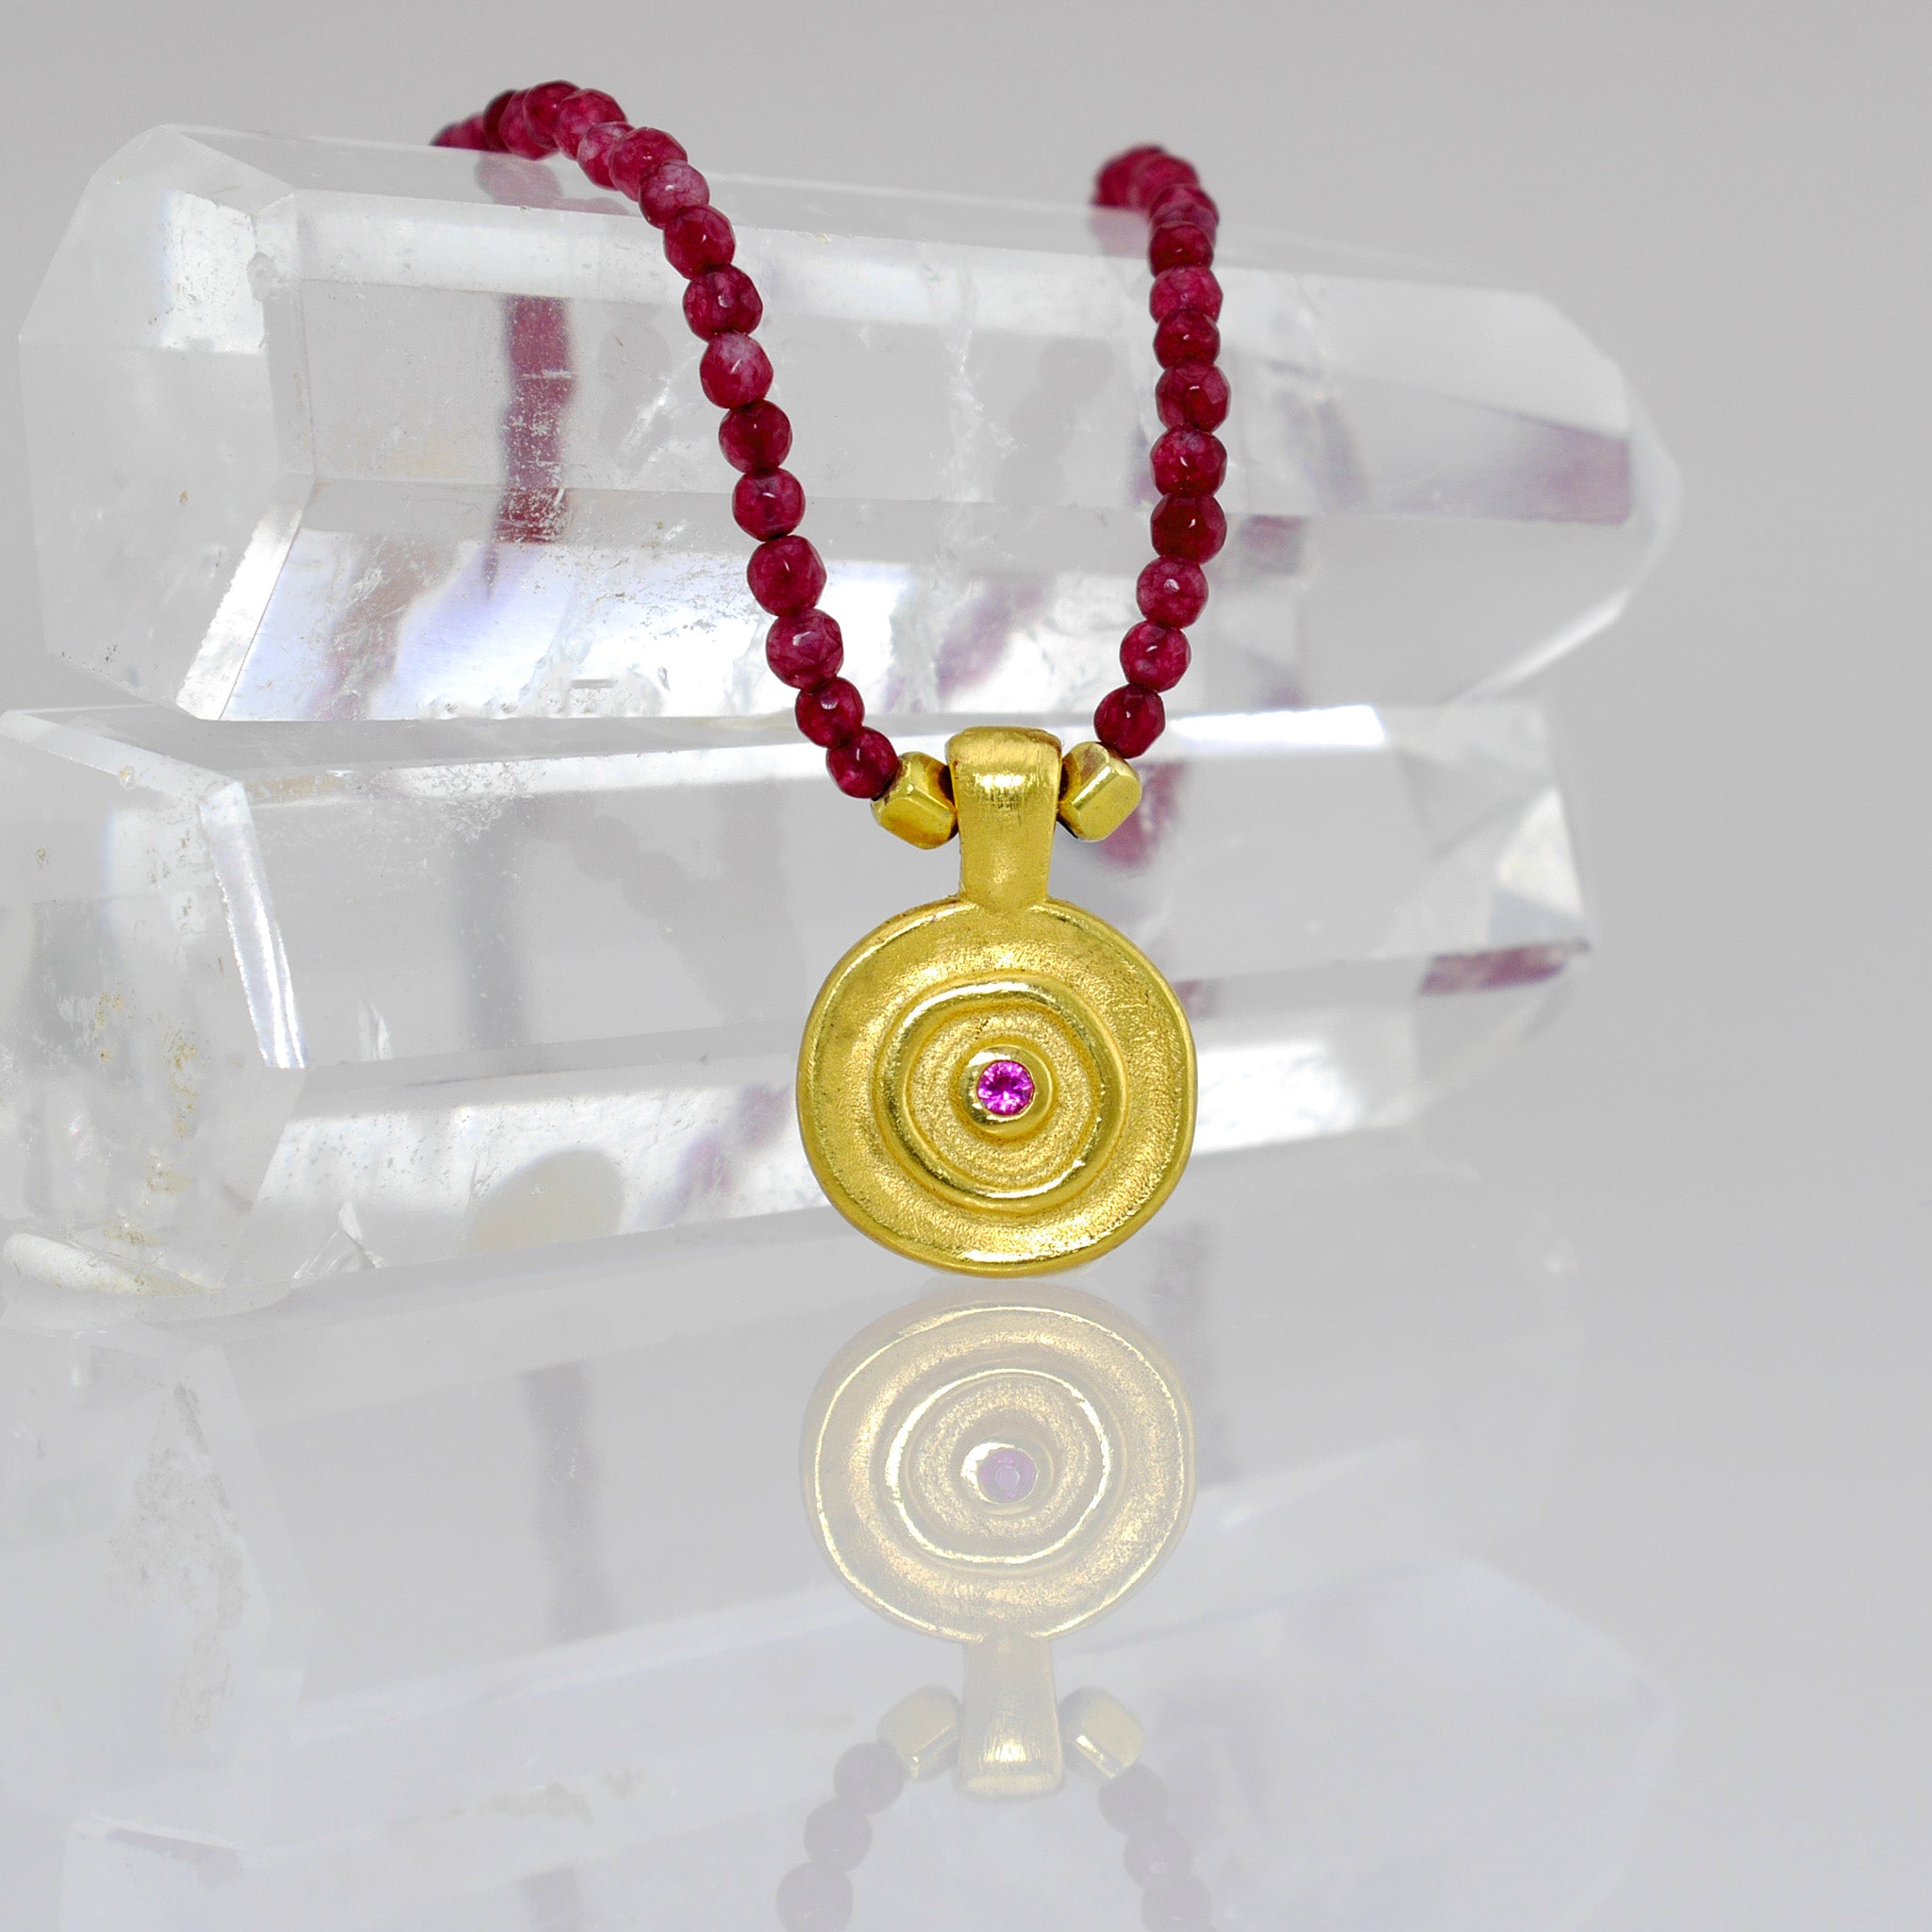 Pharaohs II - Ruby beads with ancient gold element necklace